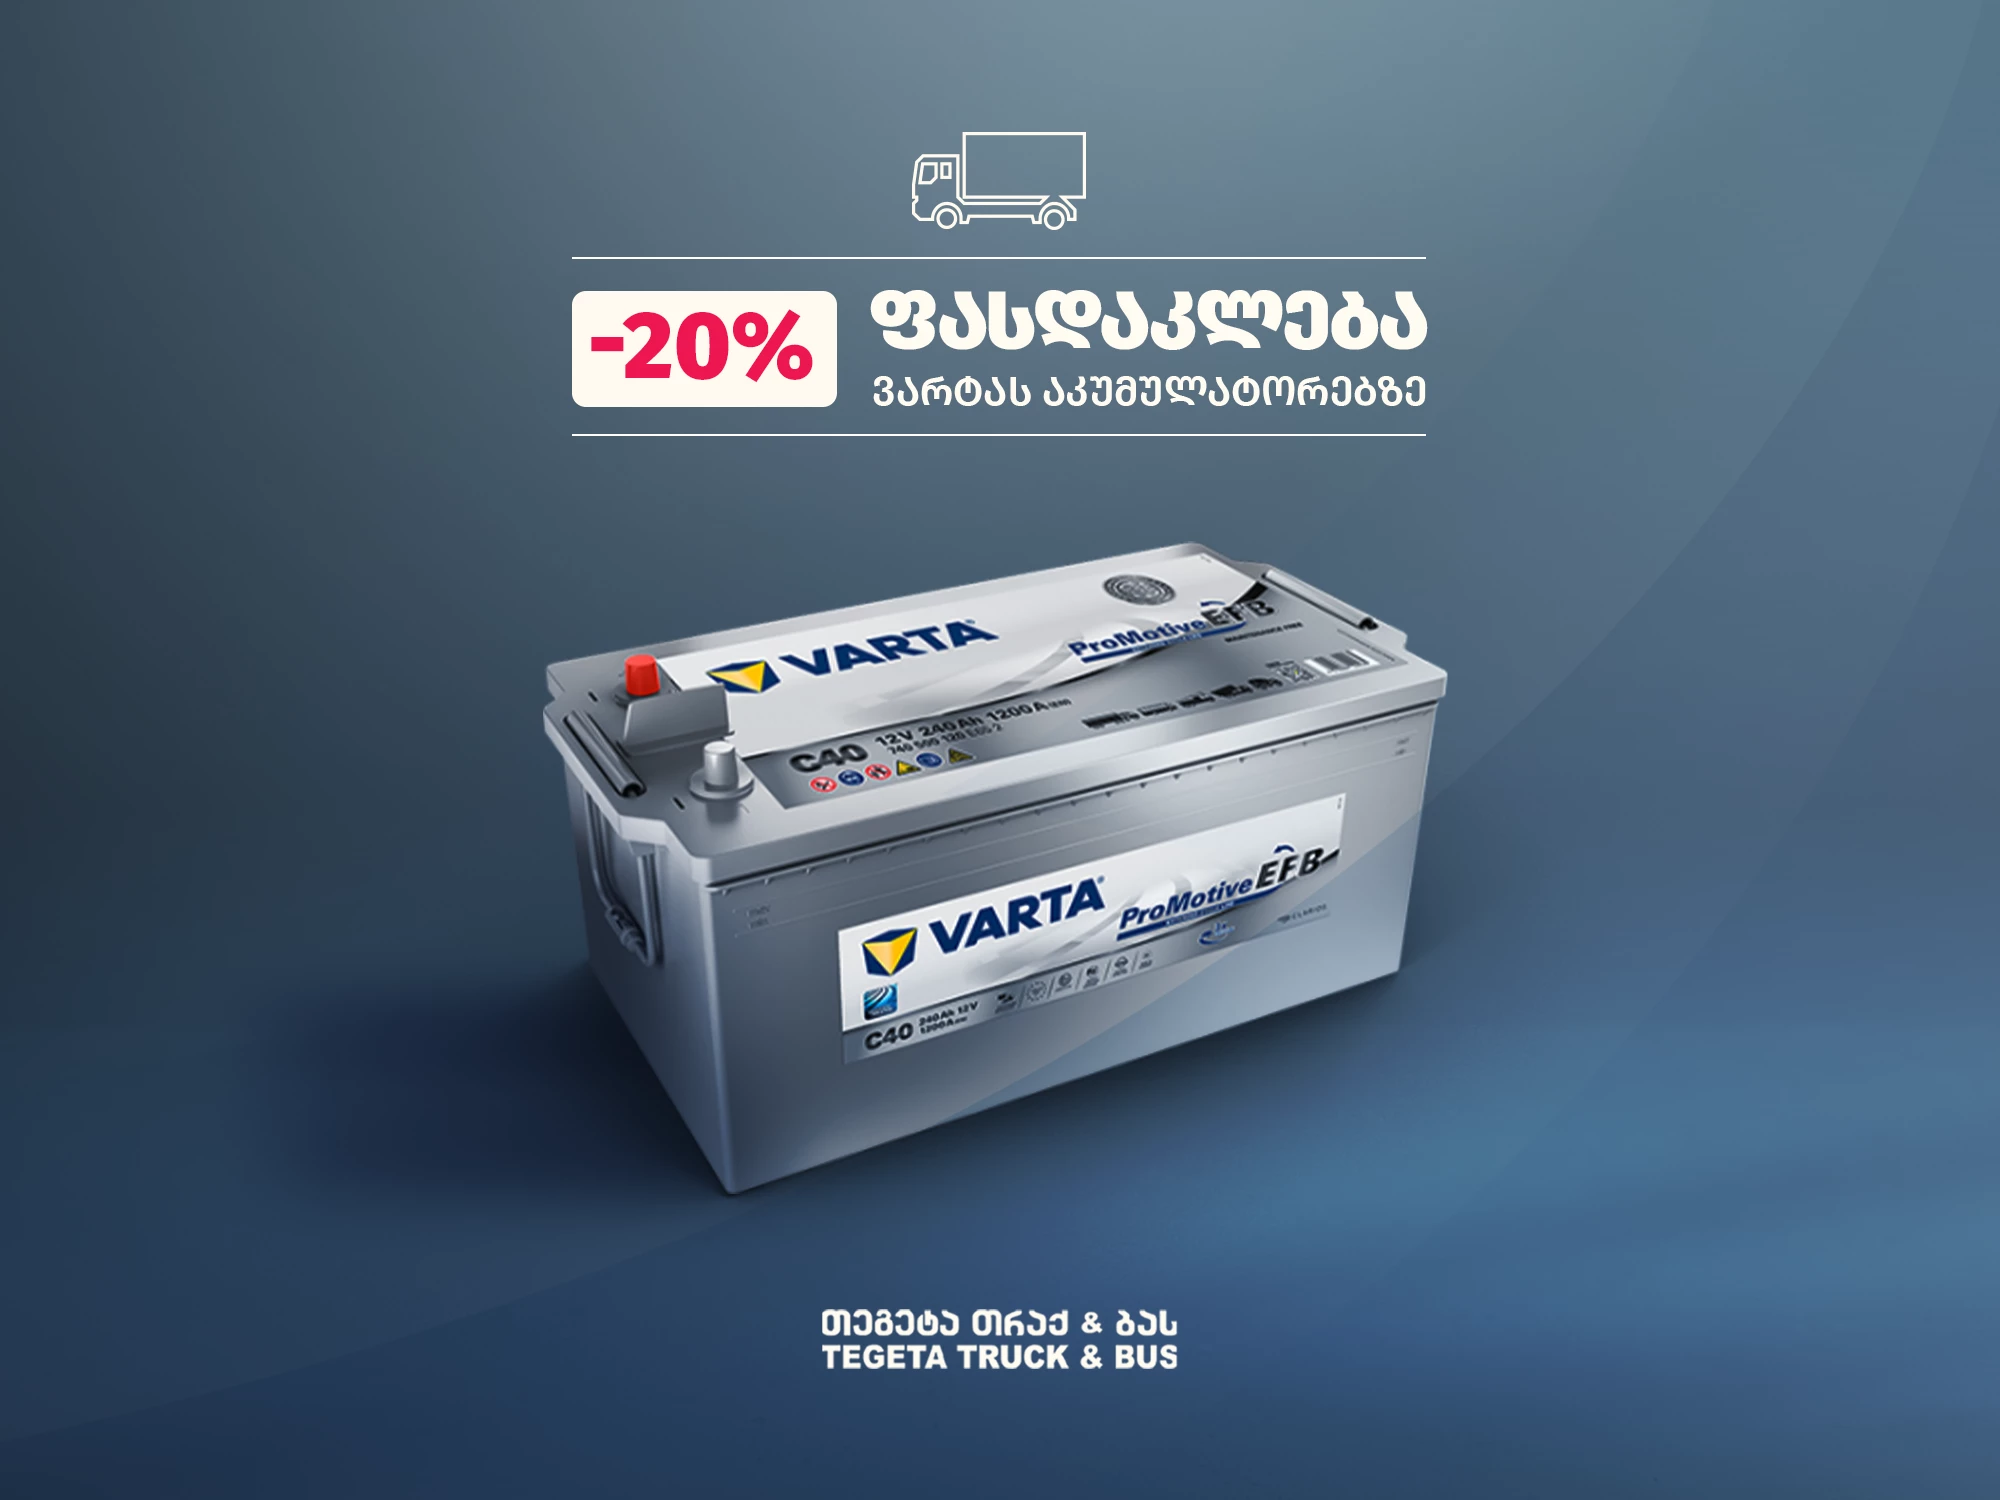 20 % DISCOUNT OFF ON VARTA BATTERY FOR COMMERCIAL MOTOR BATTERY! Offer Image